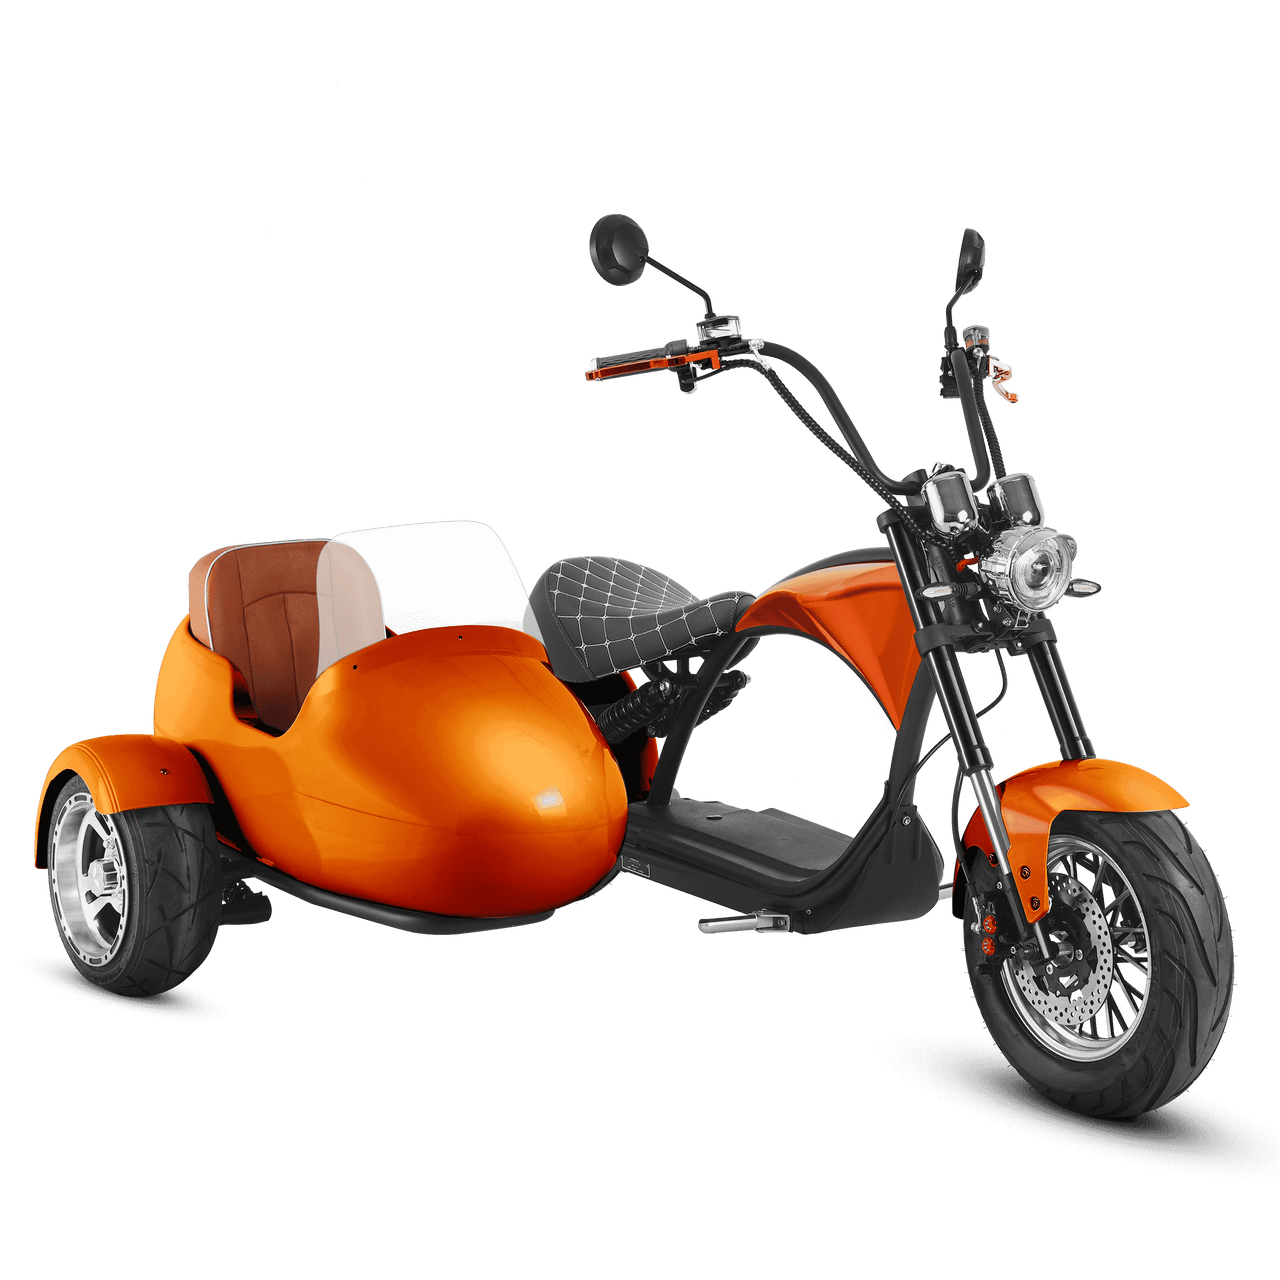 Motorcycle With Sidecar_2000W Electric Trike Scooter_Orange